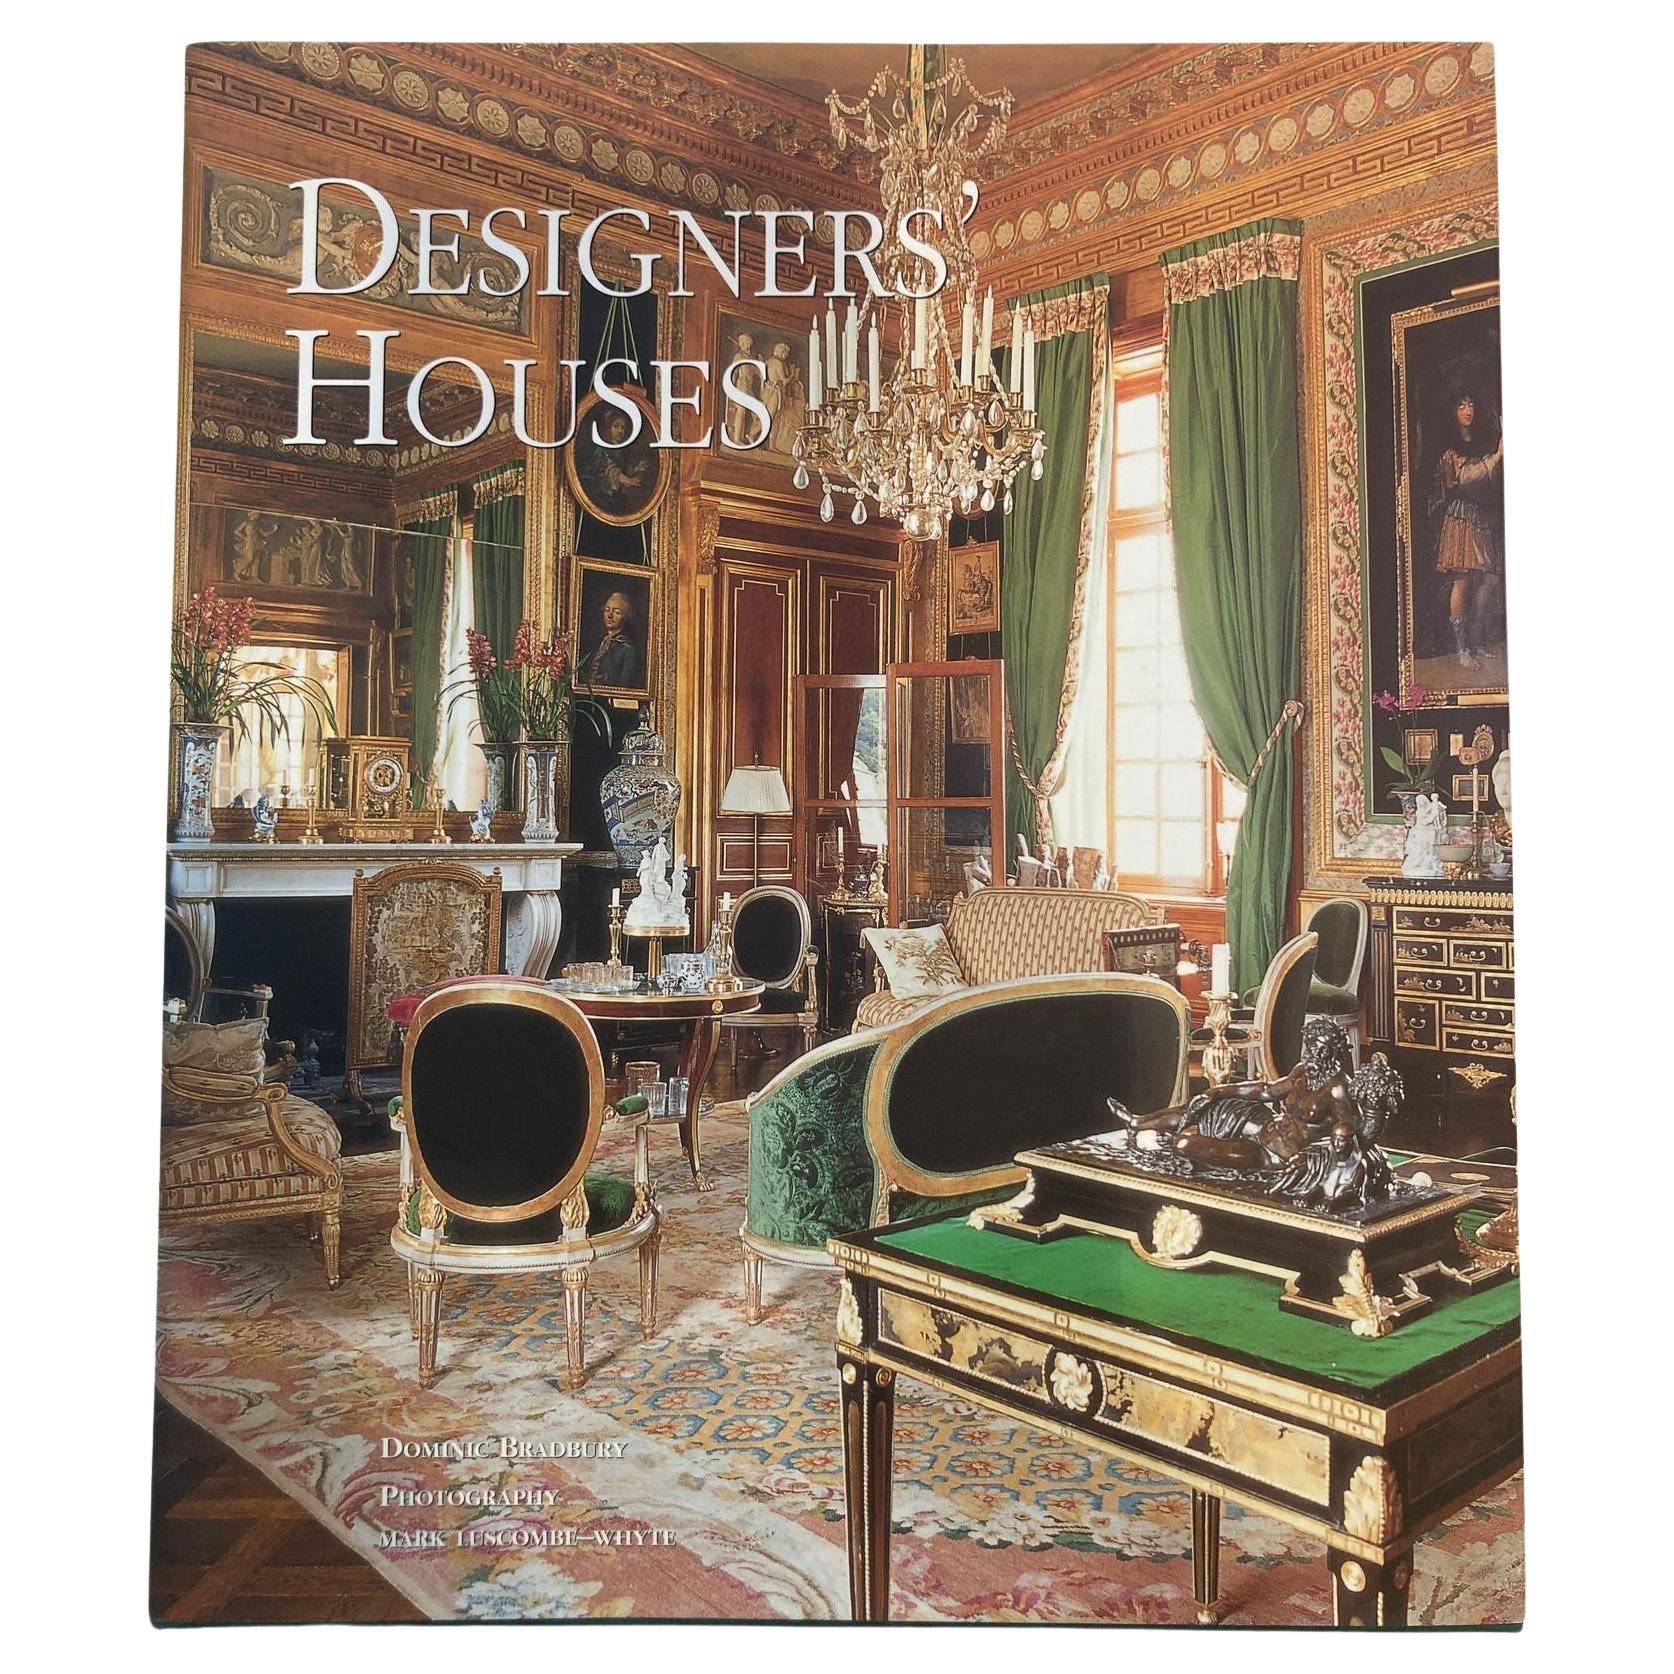 Designers' Houses Hardcover book First Edition By Dominic Bradbury 2001 For Sale